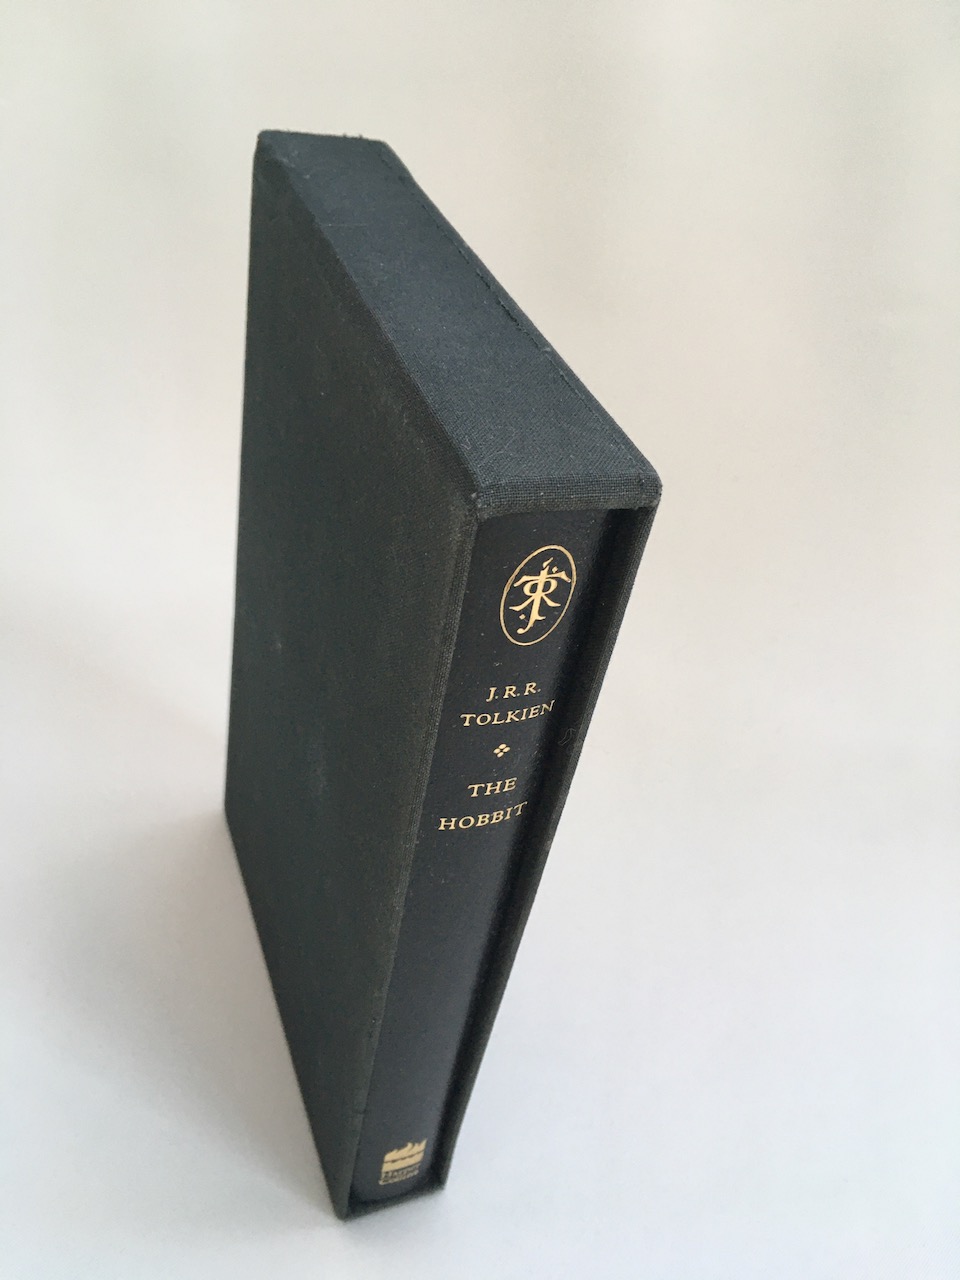 
 The Hobbit by J.R.R. Tolkien, 1999 Limited Edition, one of 2500 copies 9